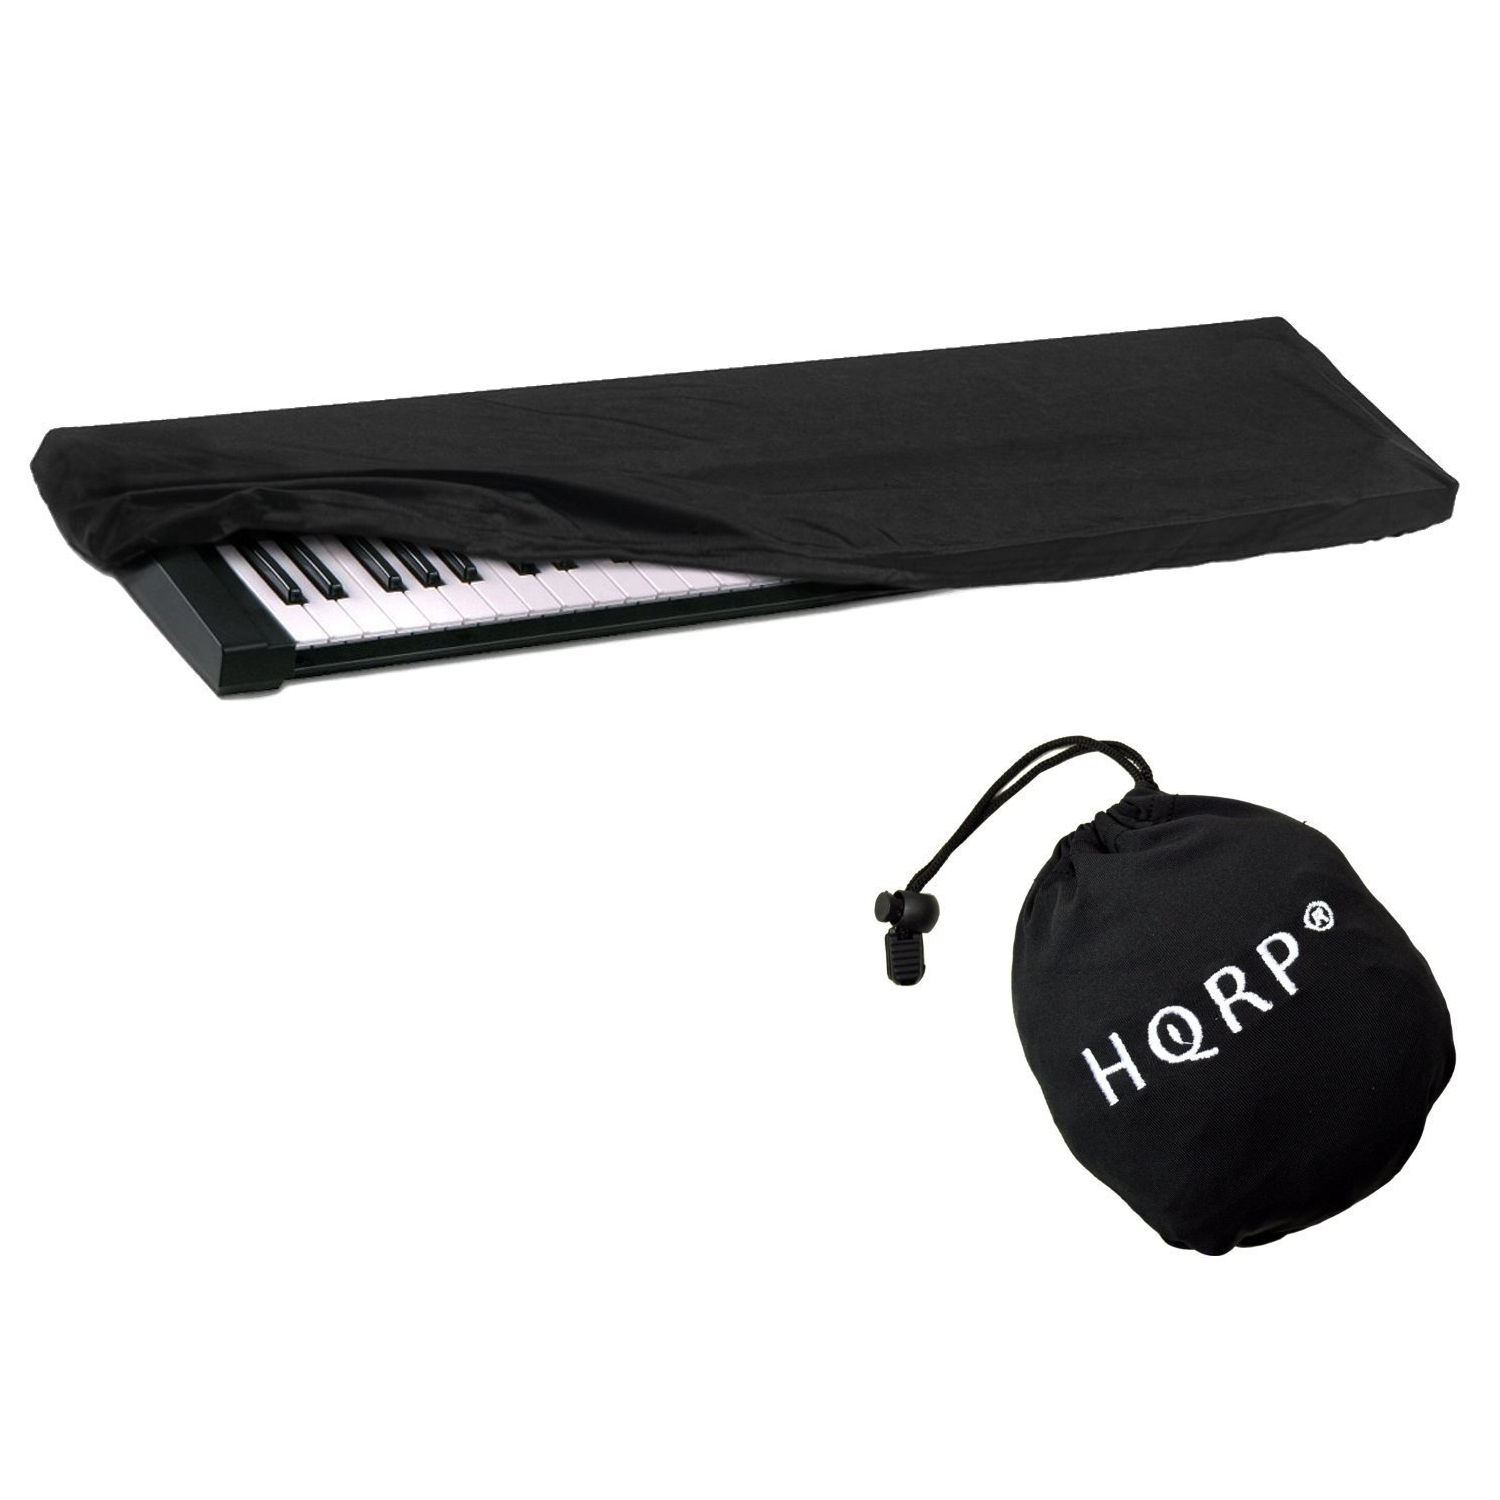 HQRP Elastic Keyboard Dust Cover for Casio CTK-2090  CTK-2200 CTK-3000 CTK-3400 CTK-3400SK CTK-350 CTK-451 Digital Piano Synthesizer